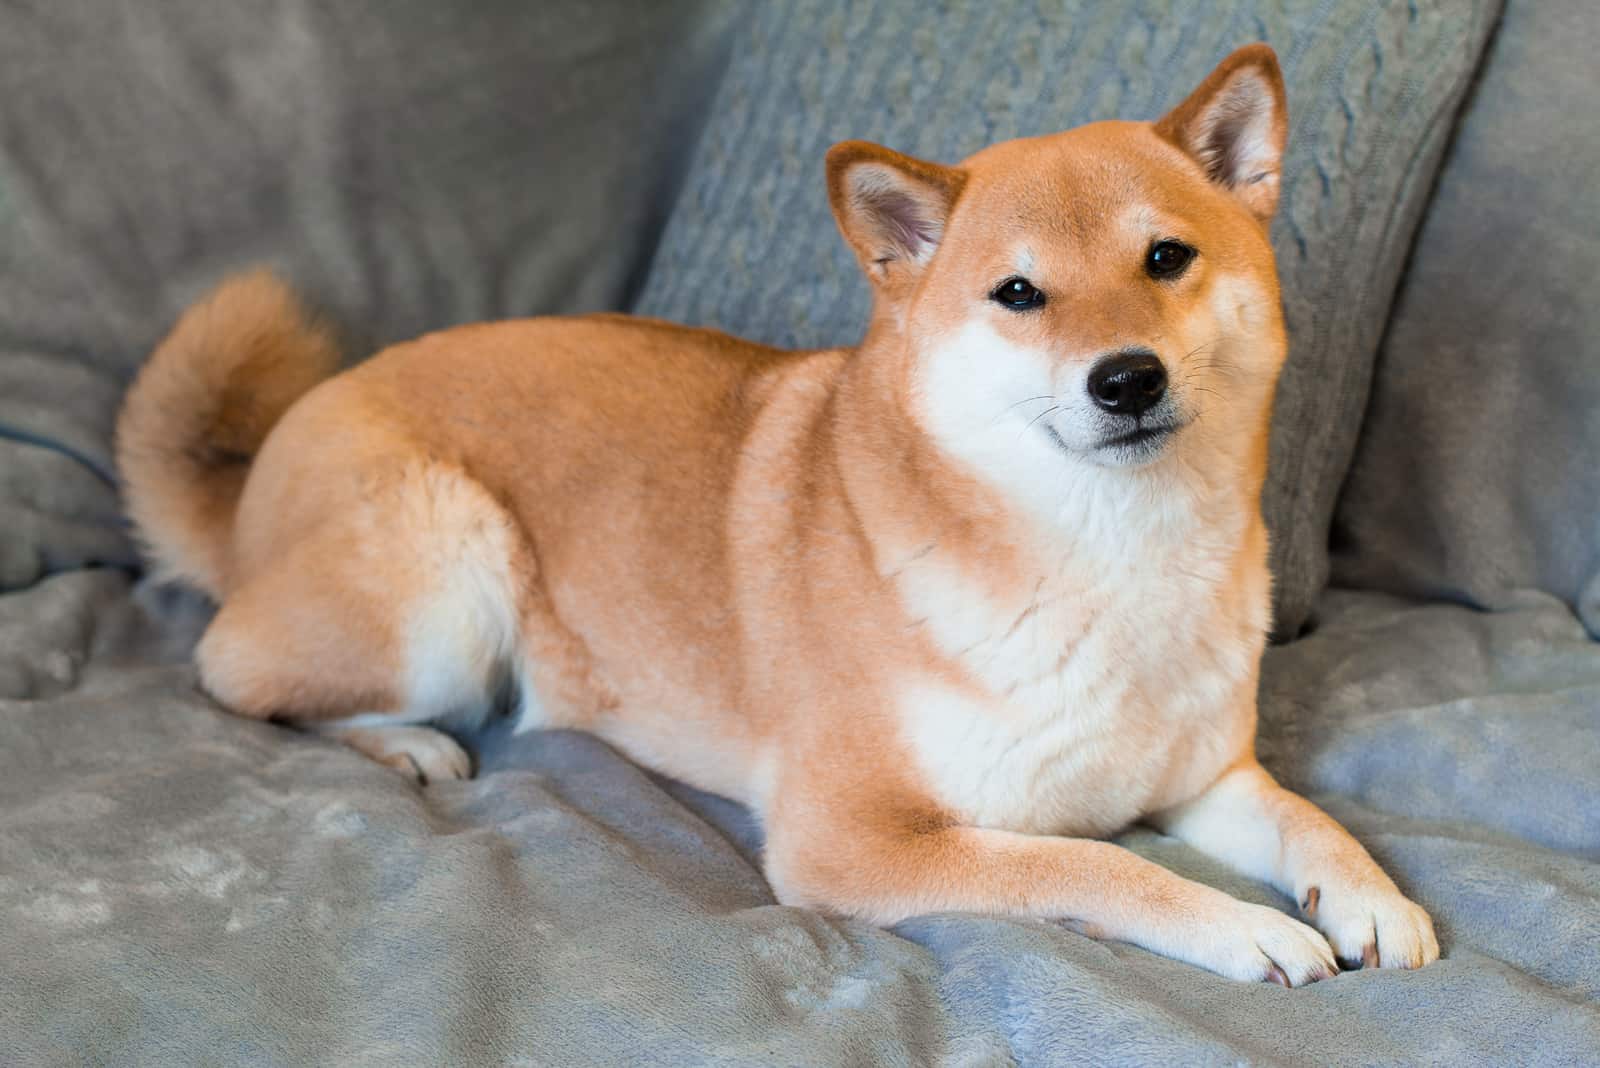 How high is shiba inu expected to go